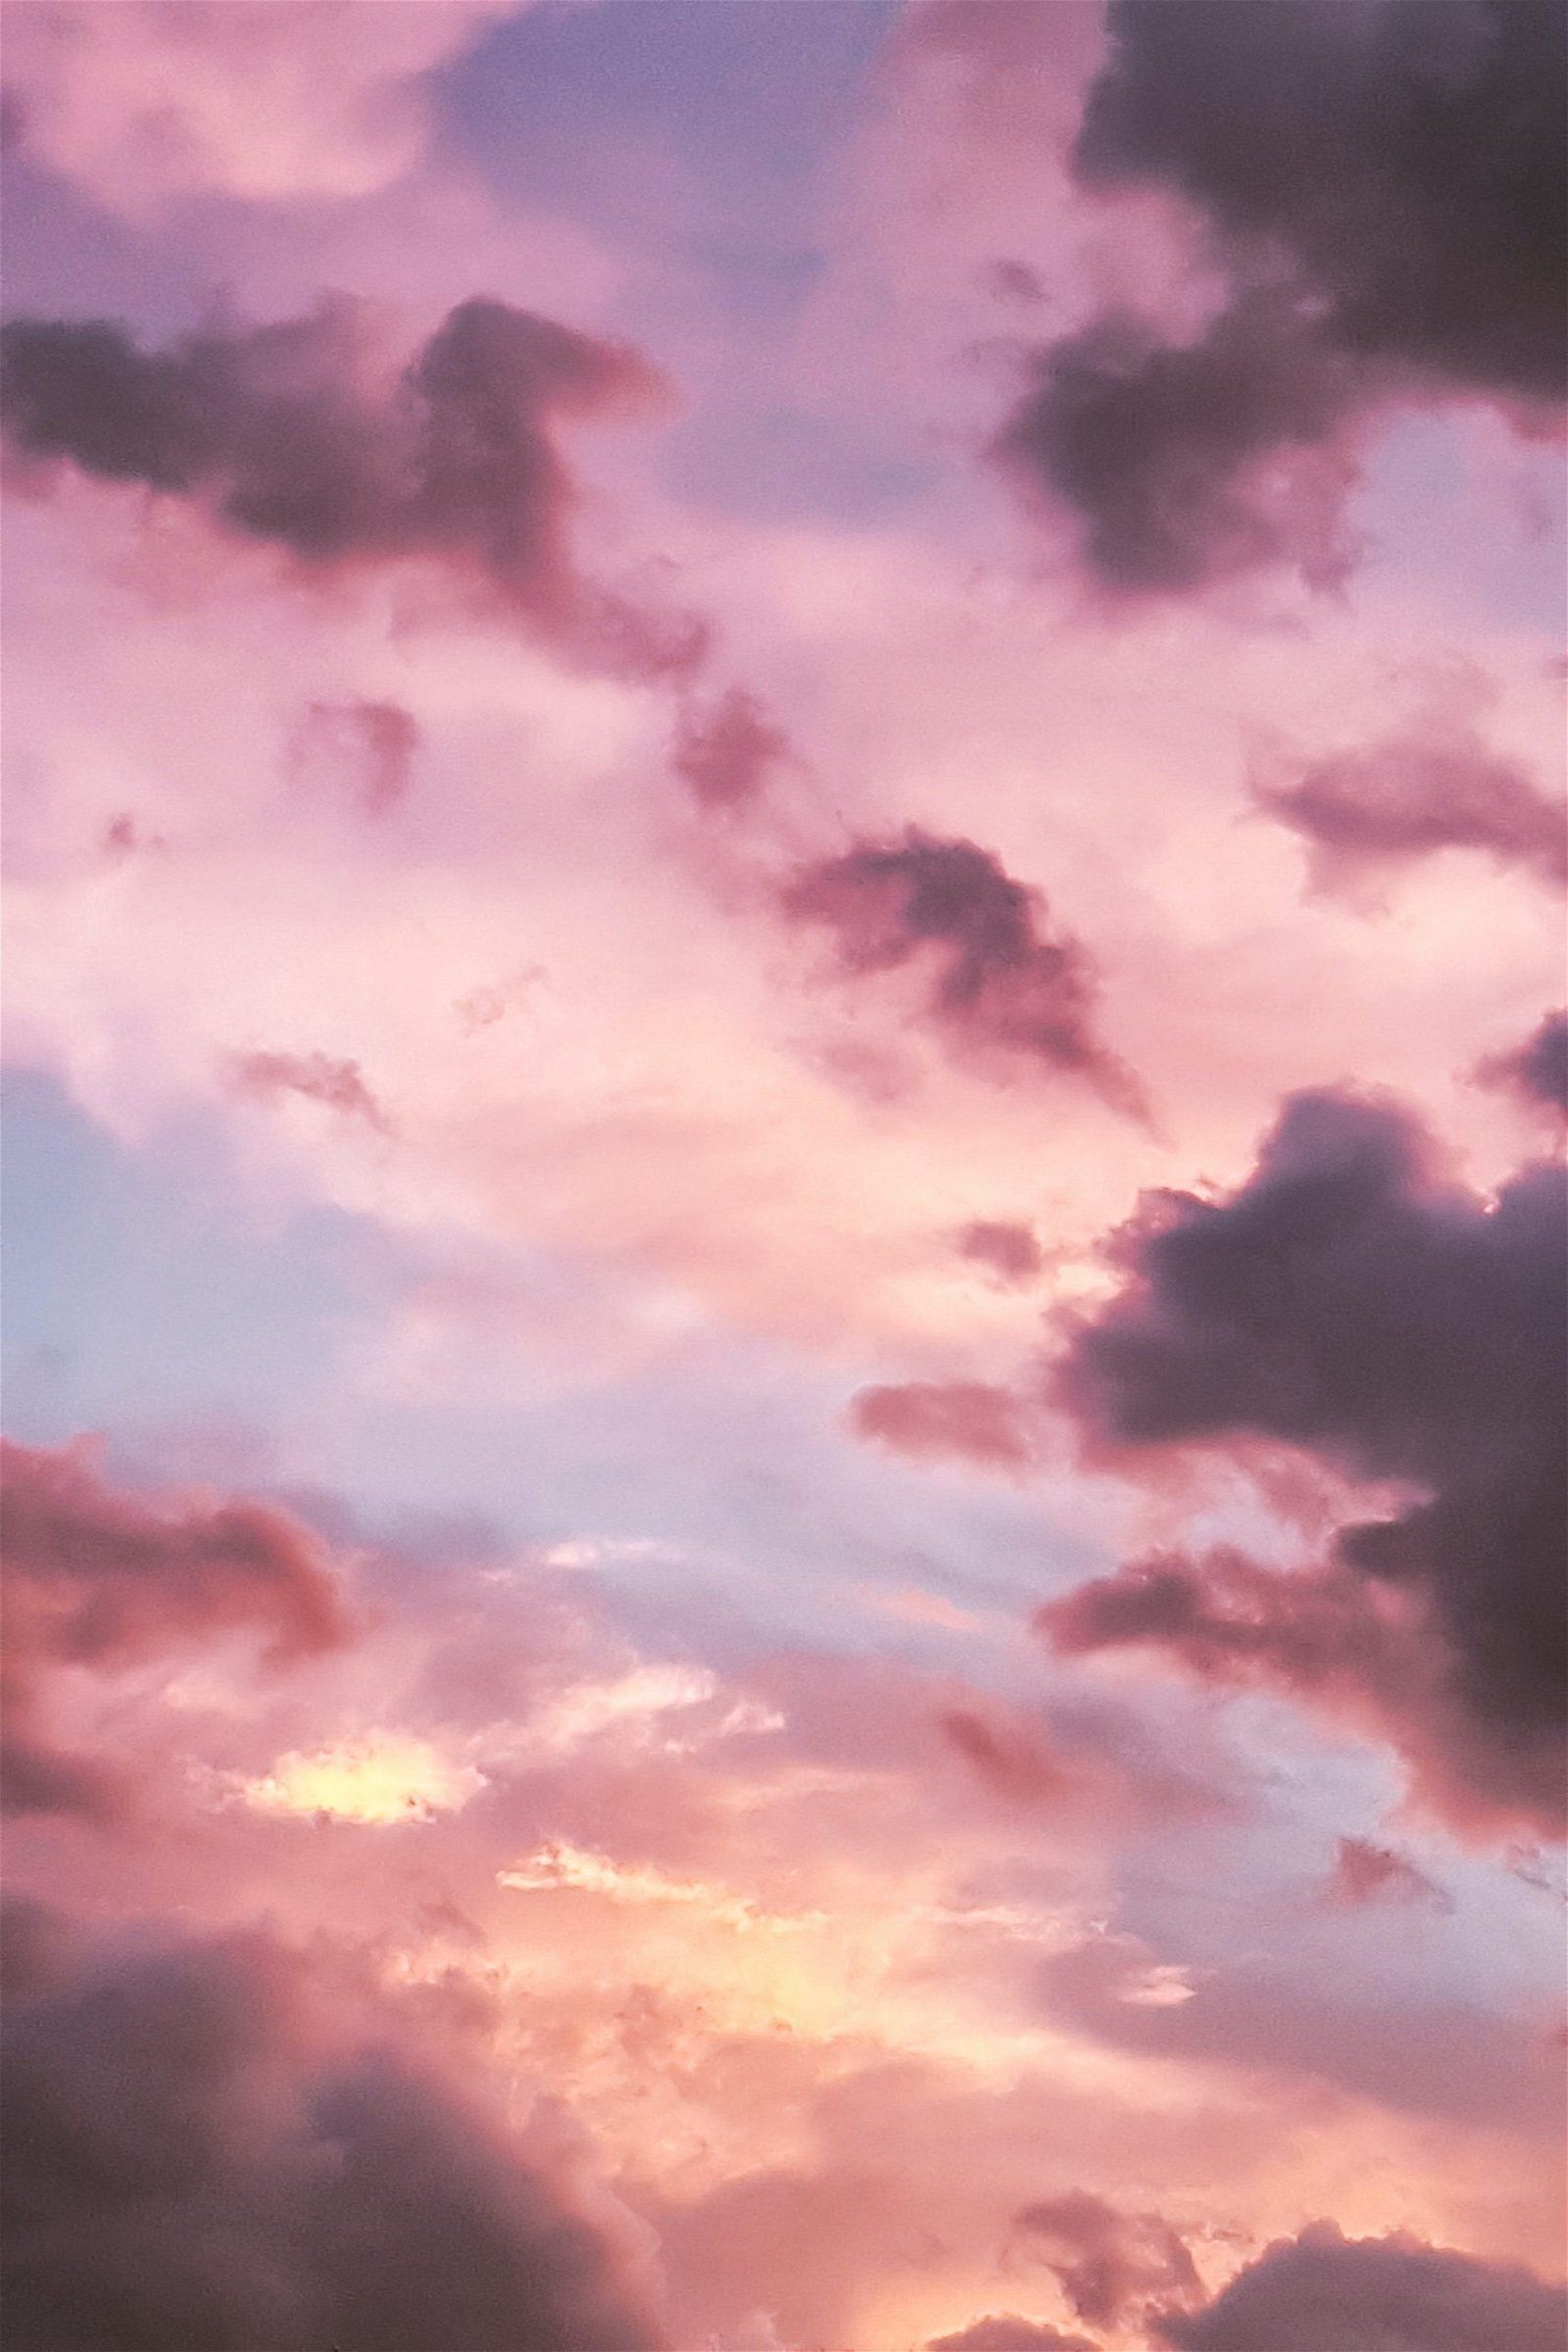 A person is flying in the sky - Pink phone, vaporwave, vintage clouds, pink, cloud, beautiful, hot pink, cute pink, light pink, bling, sunlight